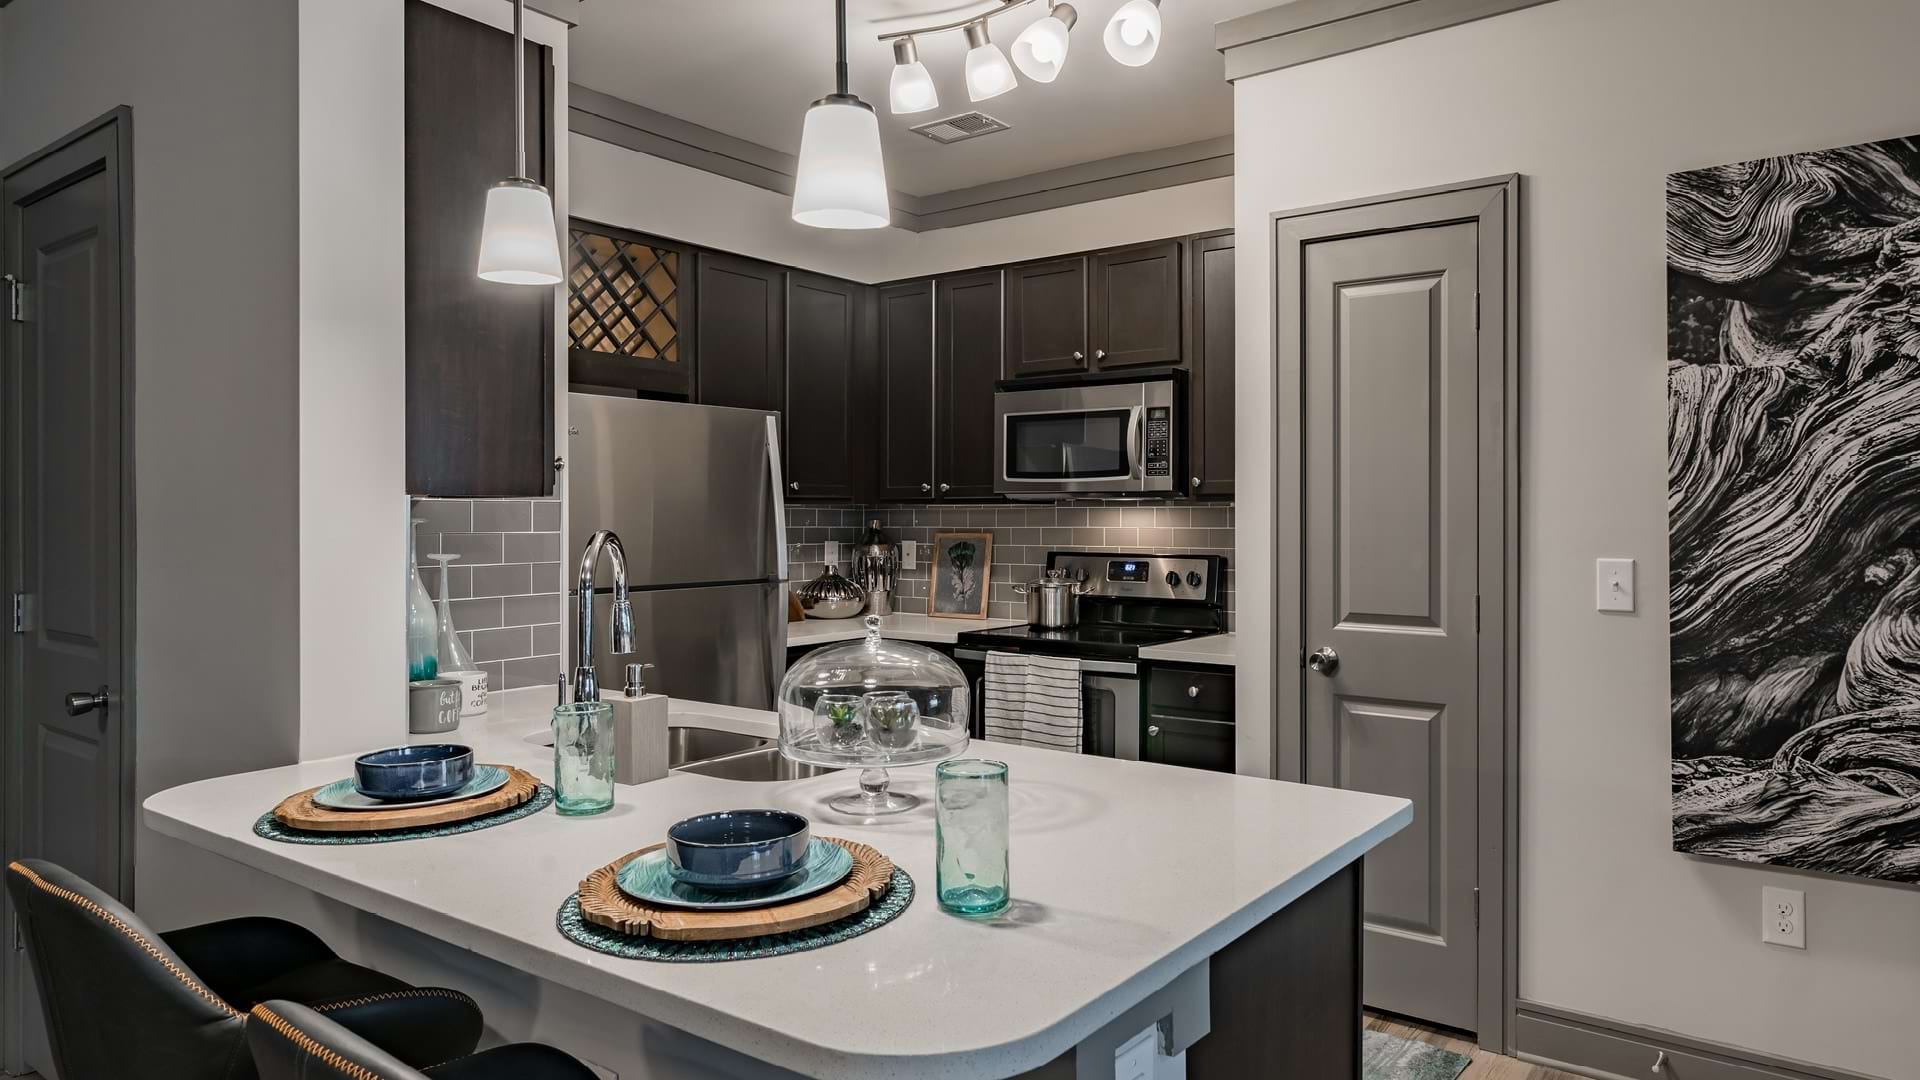 Kitchen with modern lighting and quartz countertops at our upscale apartments in Raleigh, NC